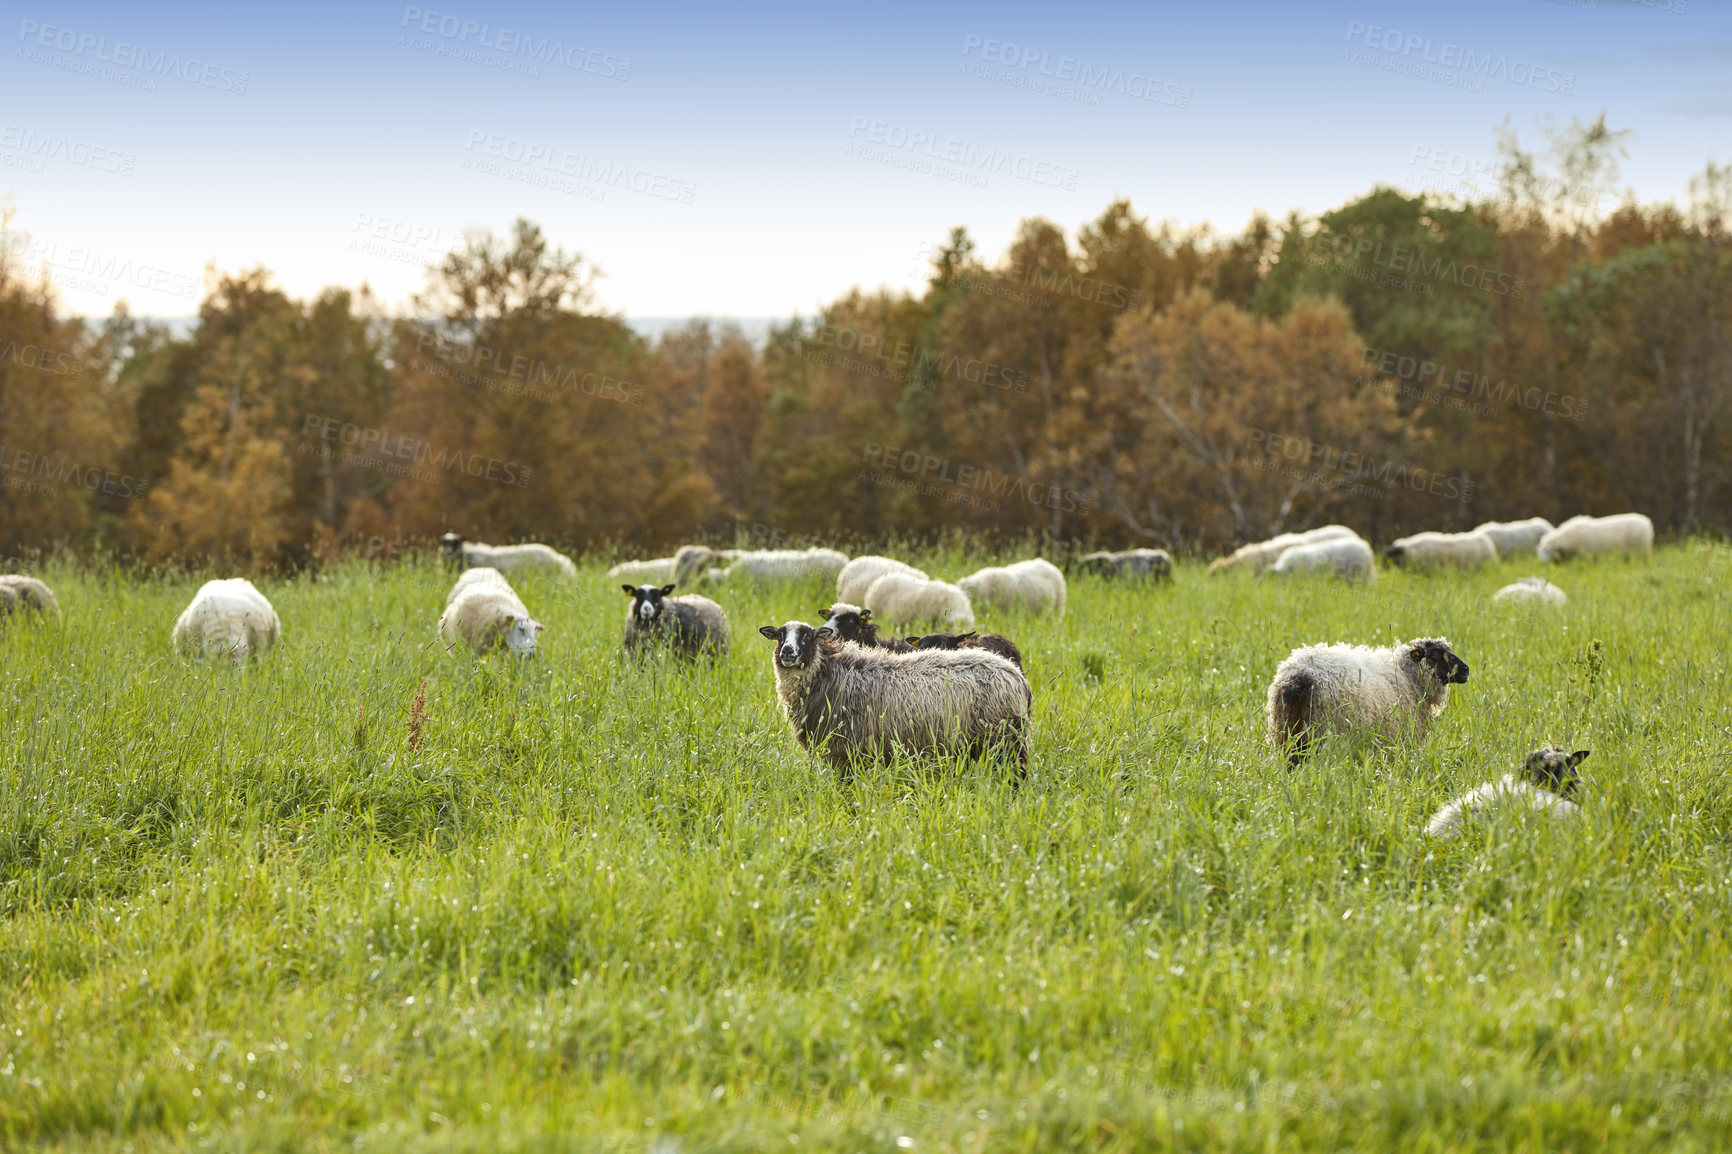 Buy stock photo Sheep on a farm in the countryside city of Bodo and its surroundings. Animals grazing on green pastures or meadows in their natural habitat. Cattle looking and walking around a field in a rural area